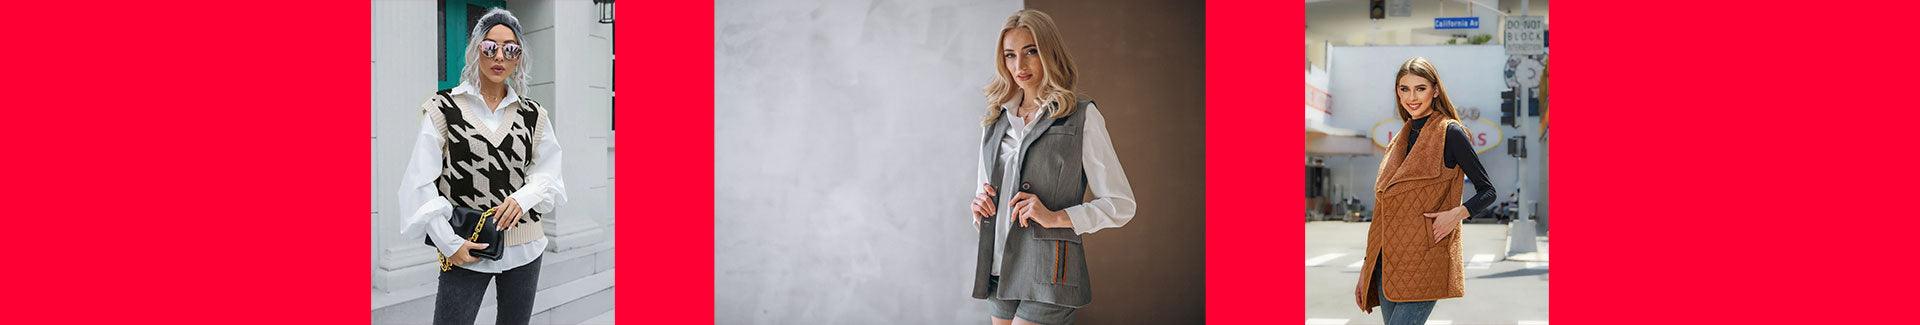 Buy Fashionable Women's Vests Online - Daily Fashion